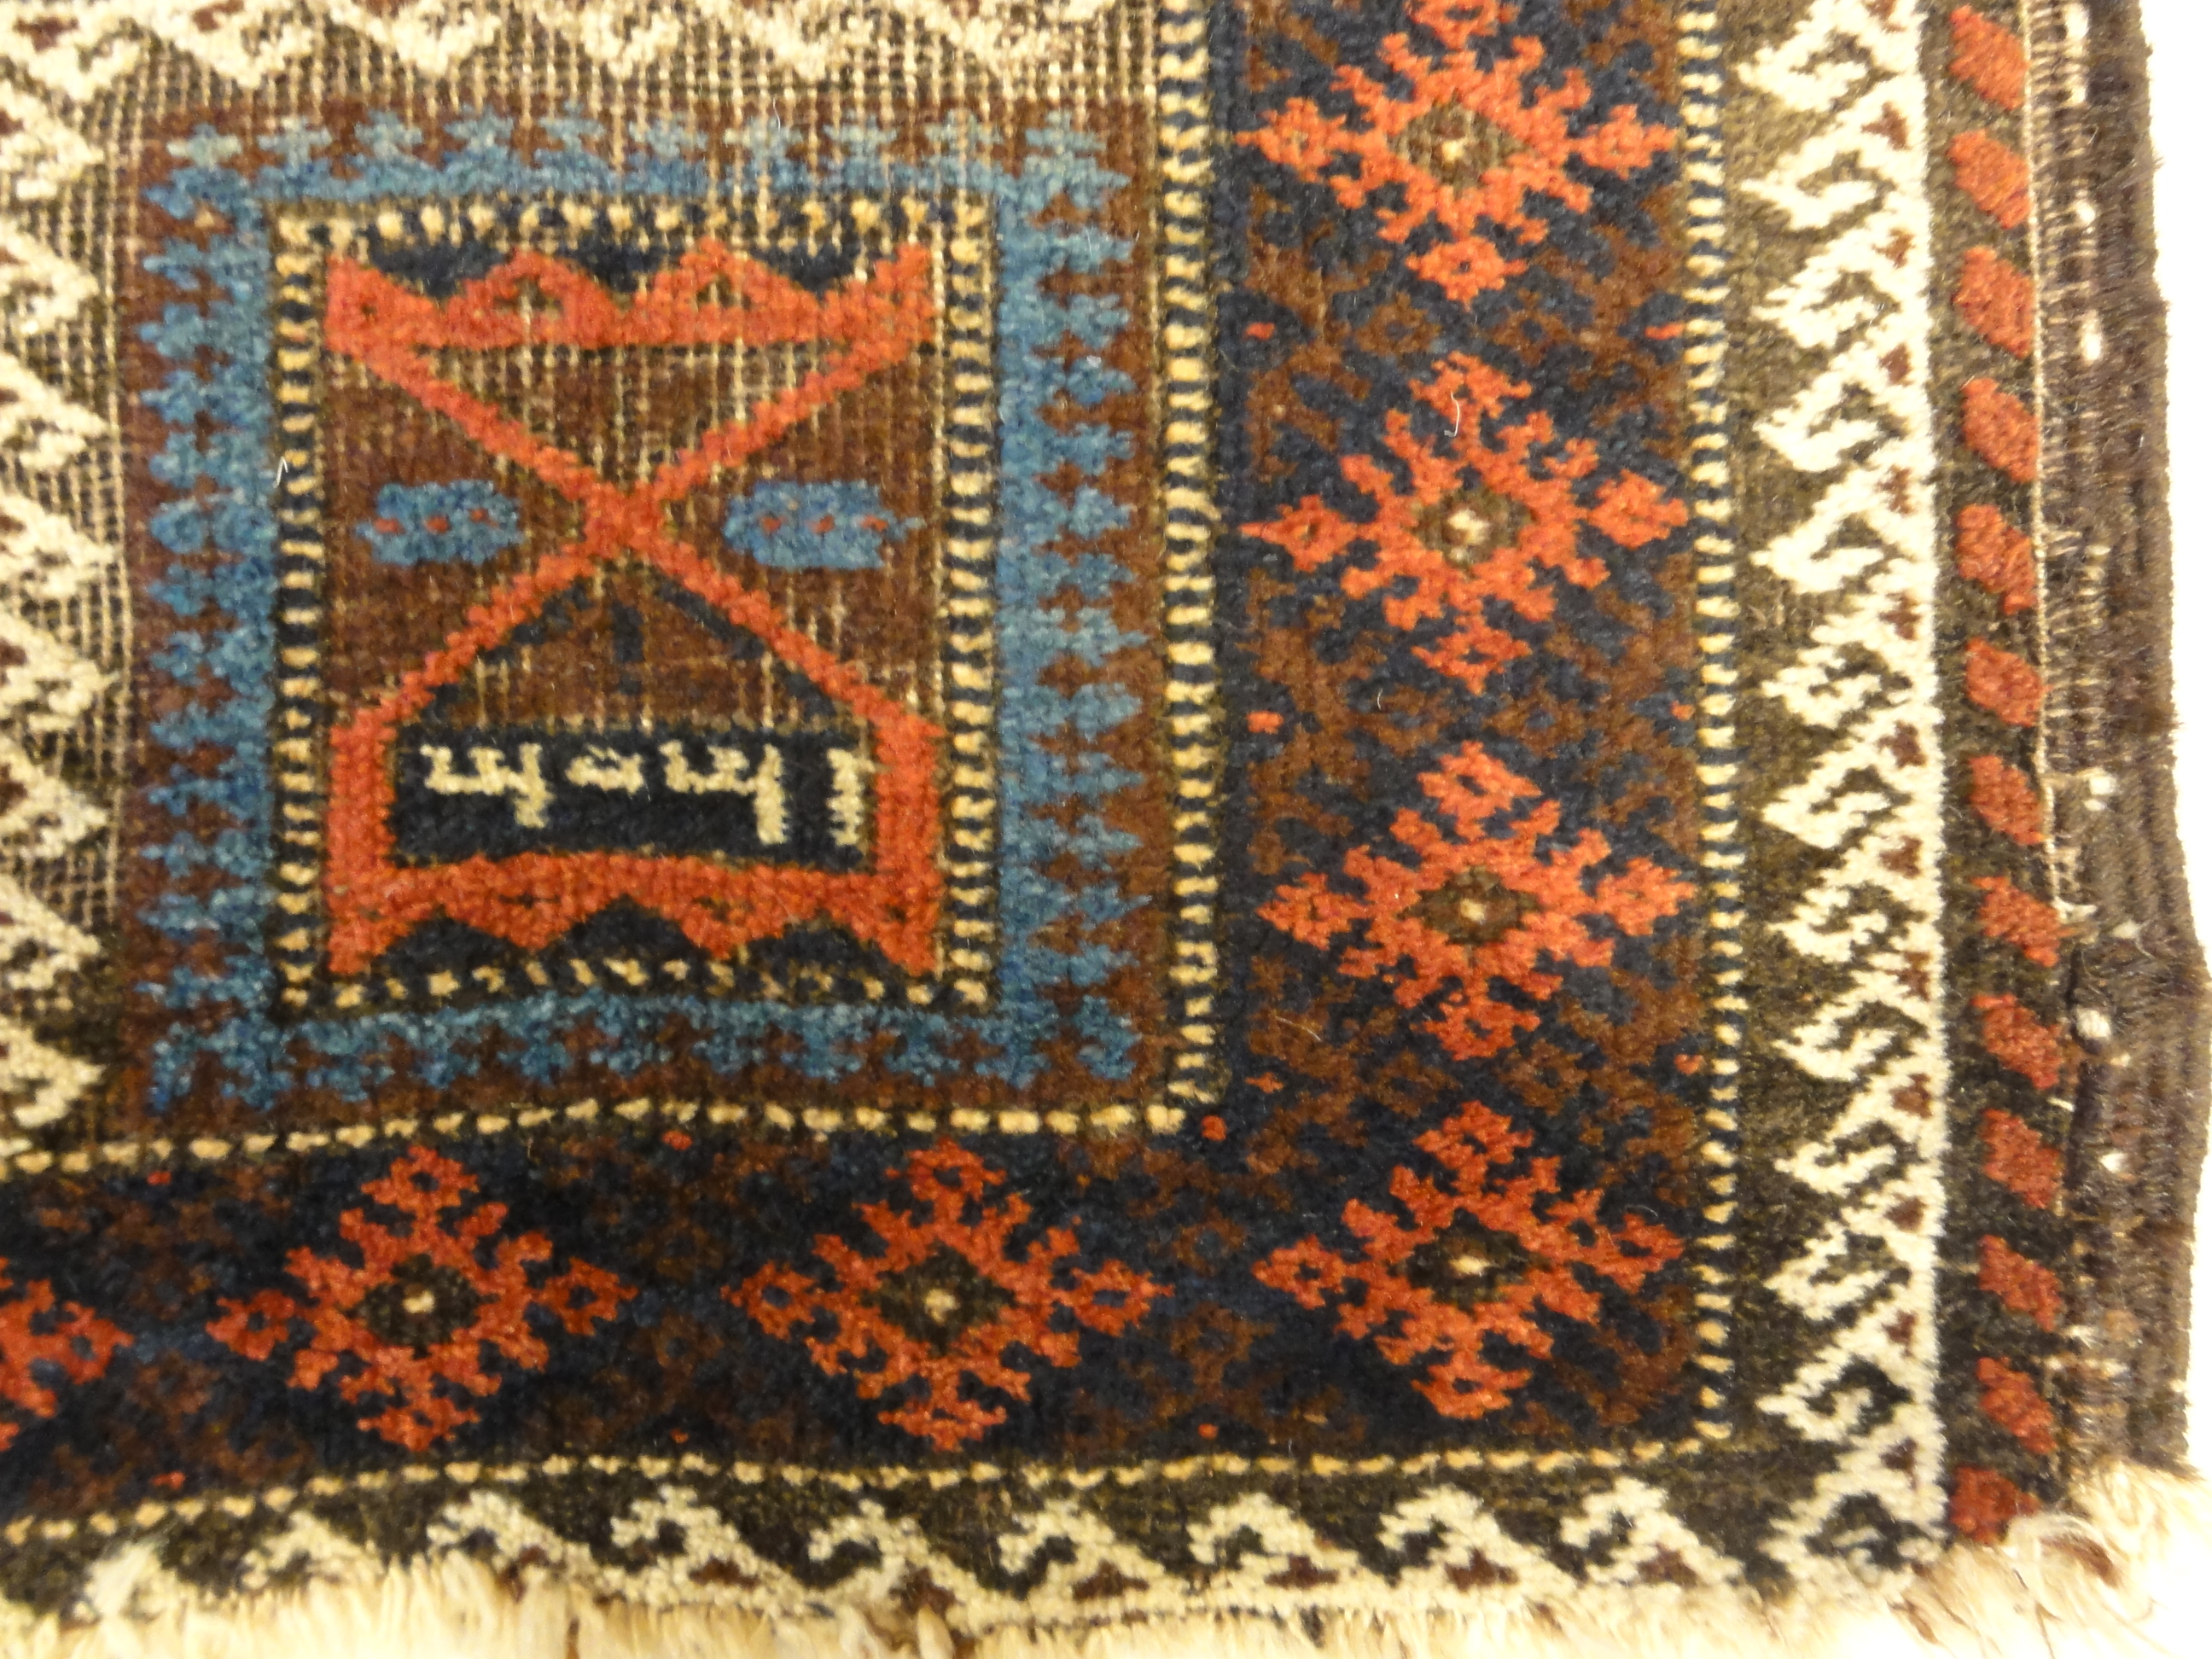 An antique and original burial Baluch dated rug. Dated on all four corners. Used as a casket covering. Sold by Santa Barbara Design Center.